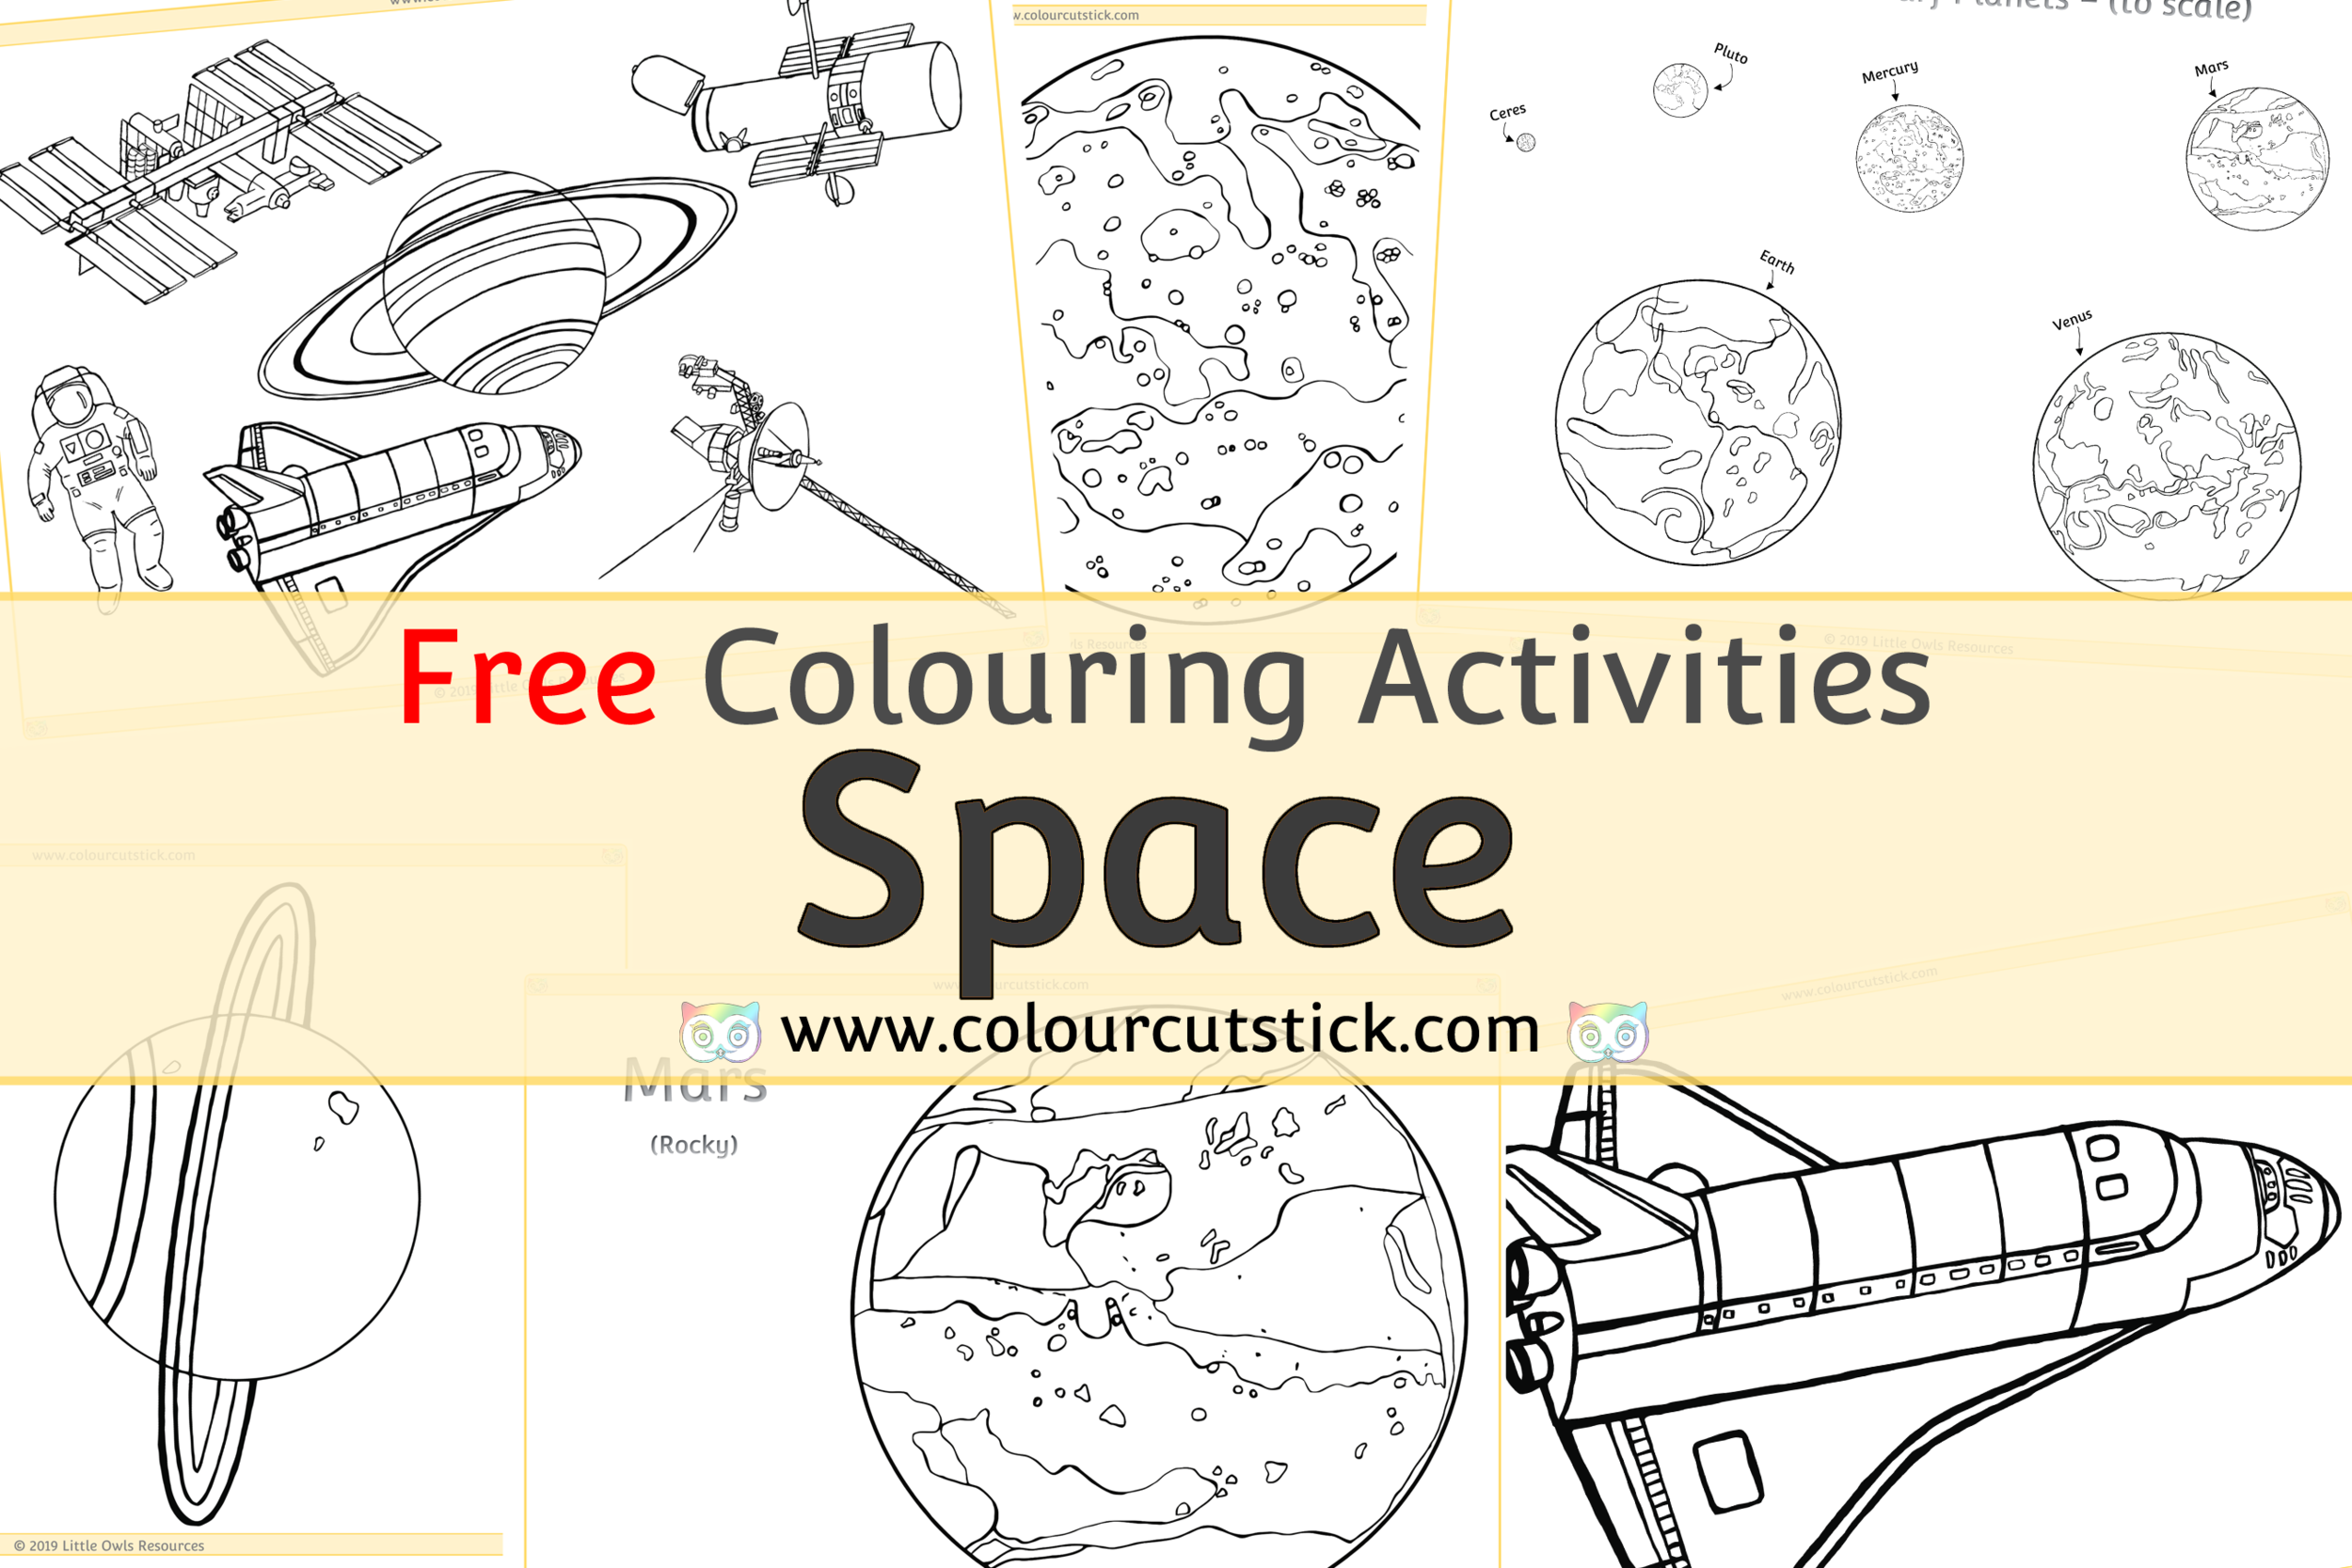 Free Space Colouring Coloring Pages For Children Kids Toddlers Preschoolers Early Years Colour Cut Stick Free Colouring Activities